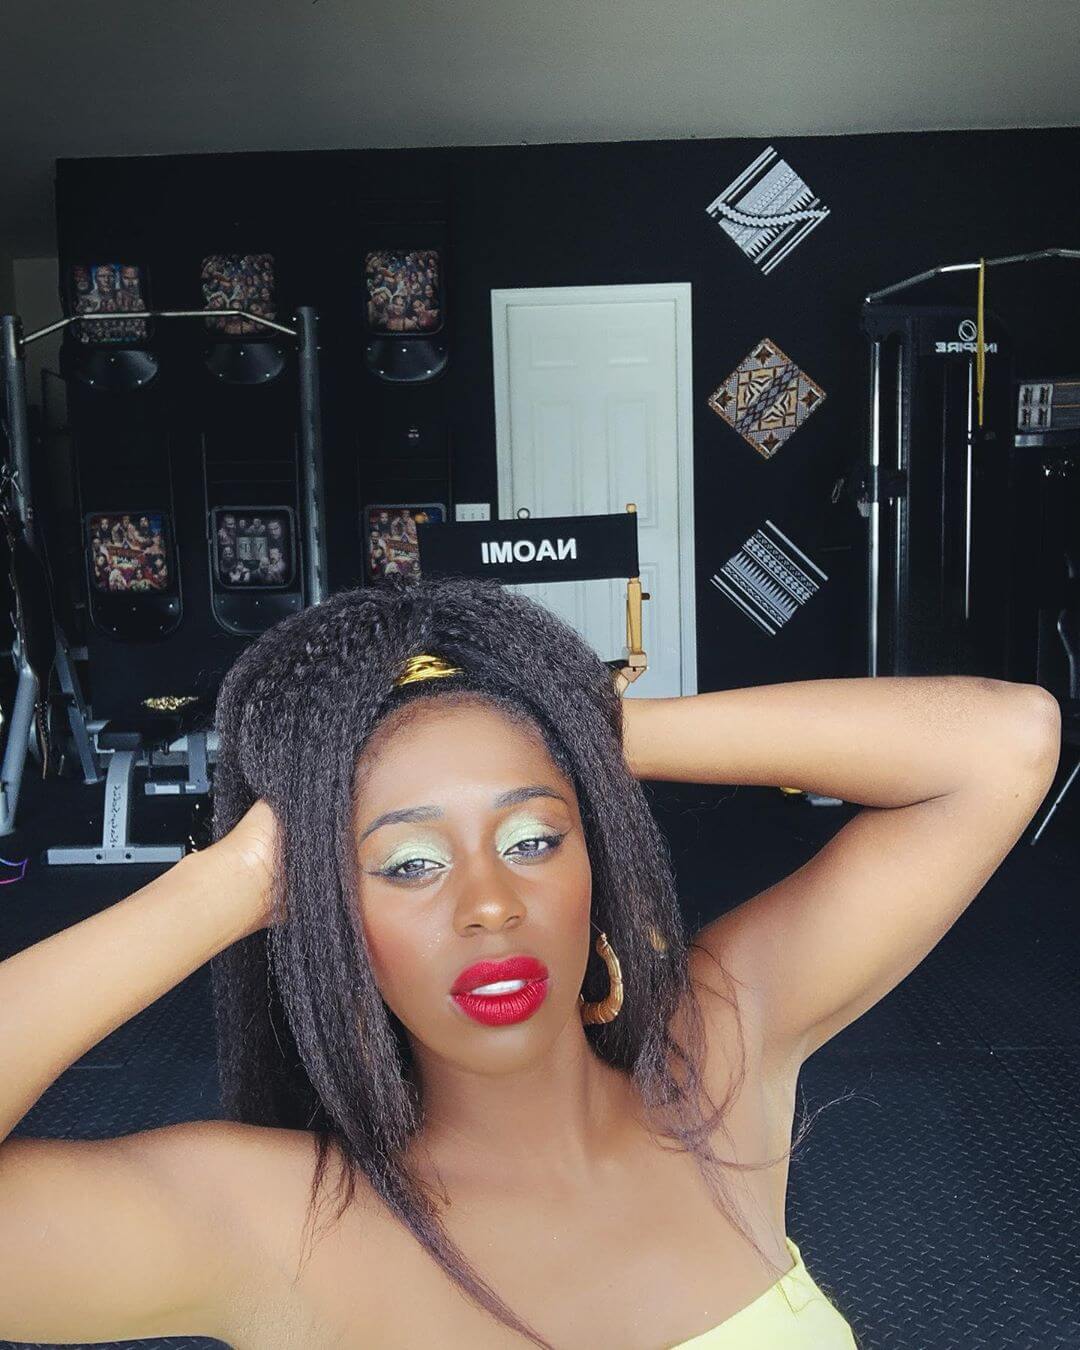 70+ Hot Pictures Of Naomi a.k.a Trinity Fatu from WWE Will Leave You Gasping For Her 14